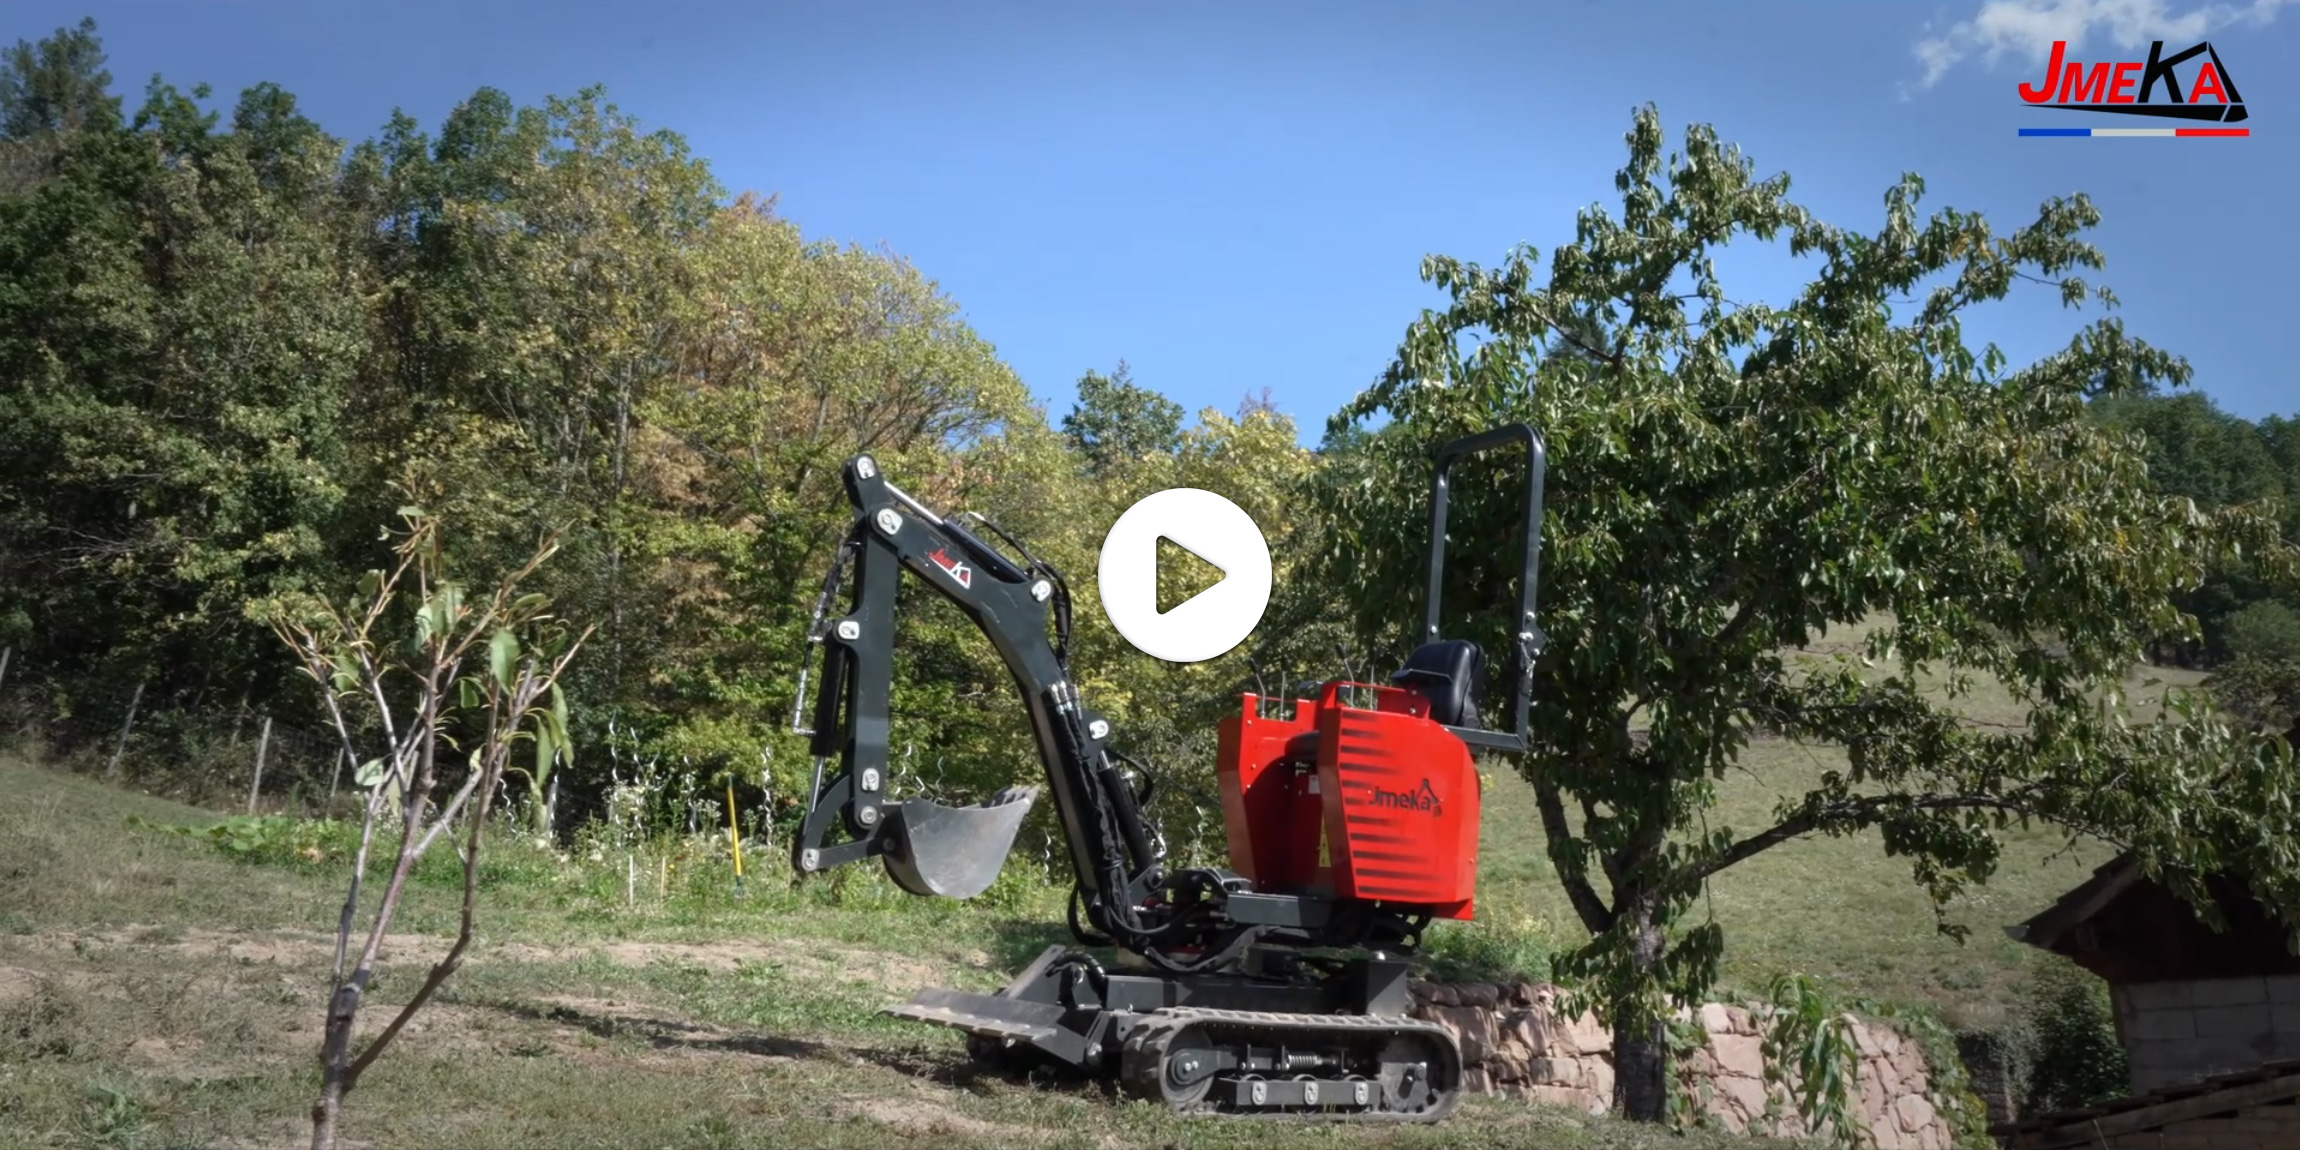 Video of a JMEKA Mini-Digger in action